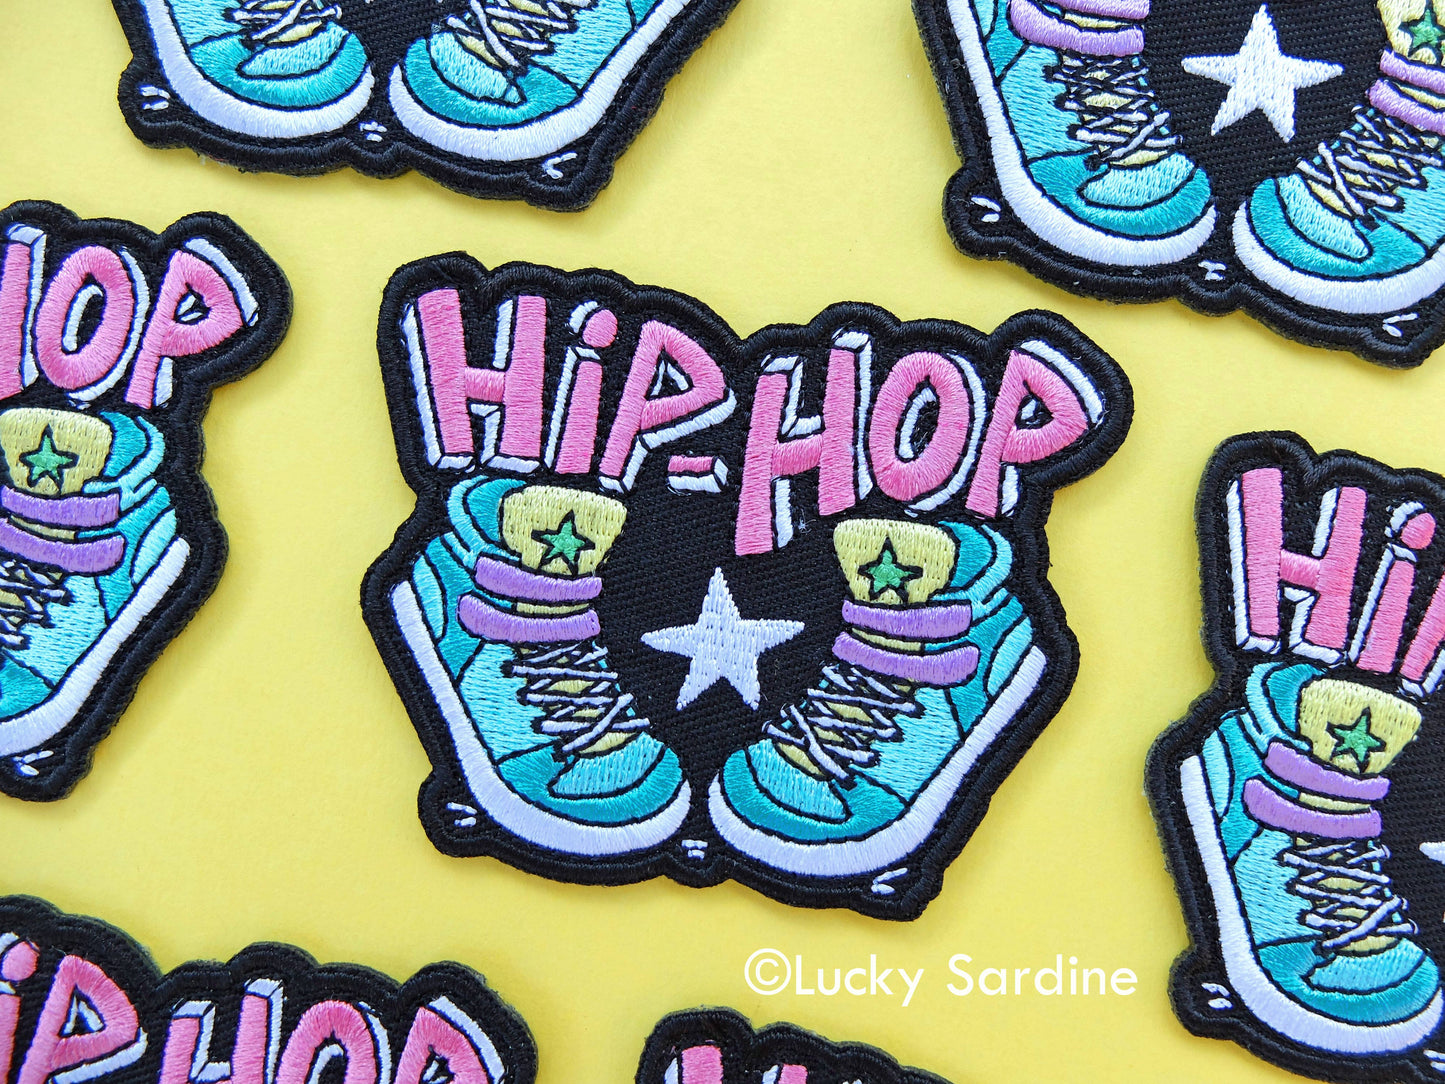 Lucky Sardine - Hip Hop Dance, Embroidered Patch: No (Loose Patches)